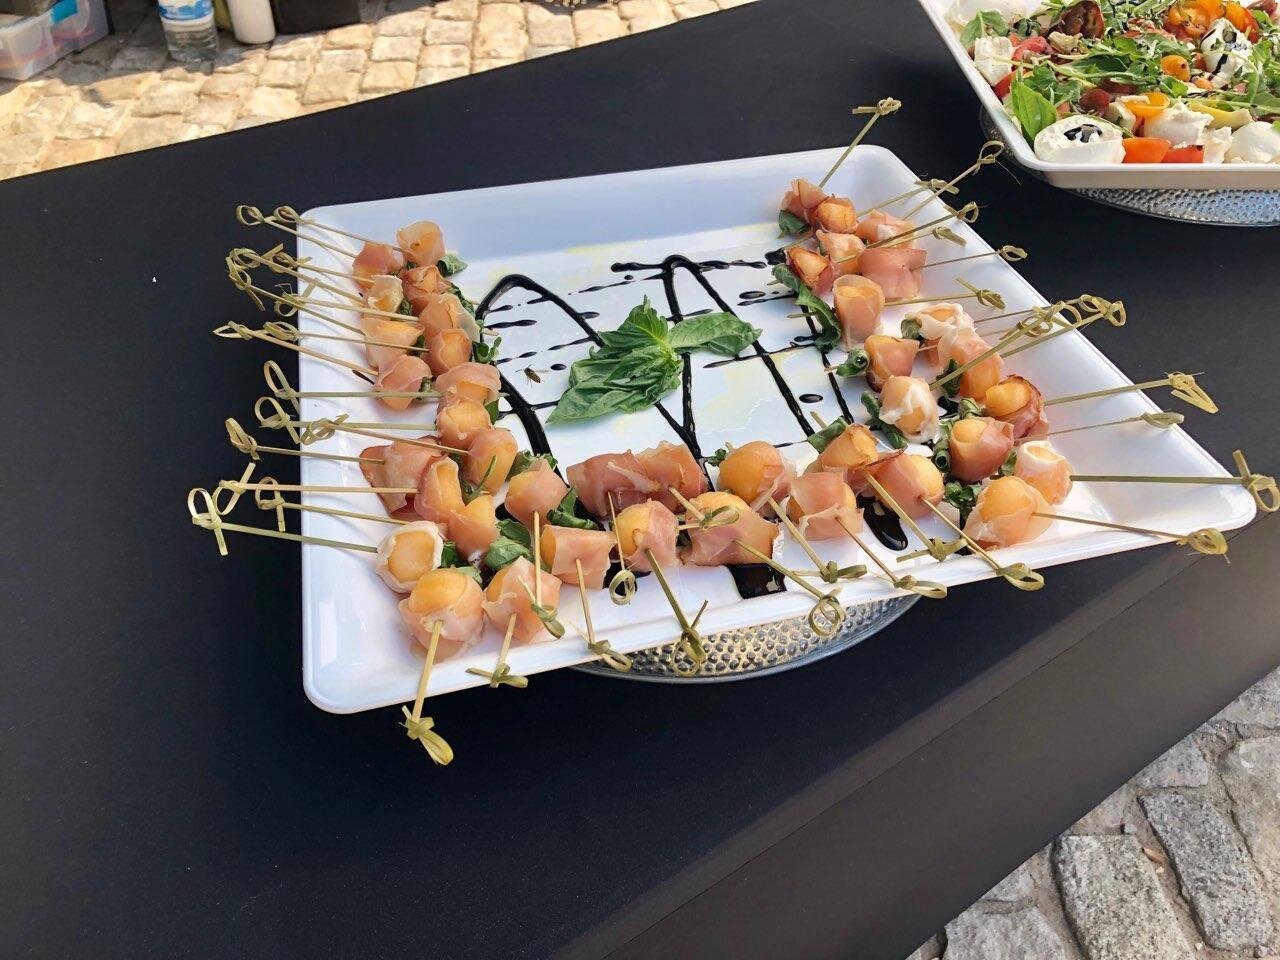 www.santabarbarawedding.com | Firefly Pizza Company | Bite Sized Appetizers on a Stick Wrapped in Bacon